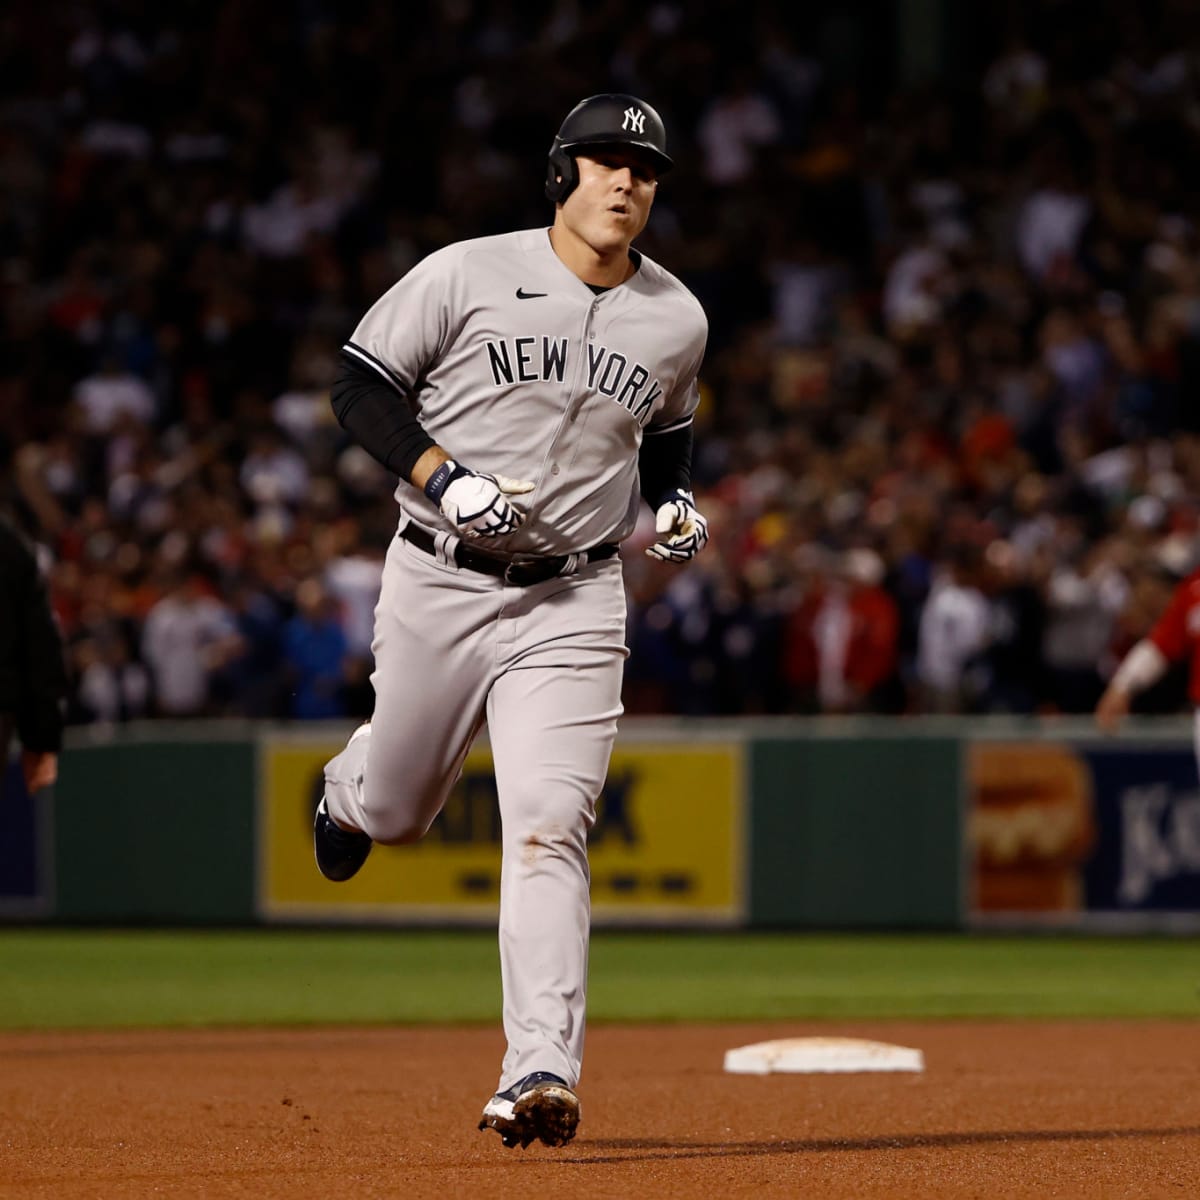 Anthony Rizzo to injured list with concussion, Yankees say